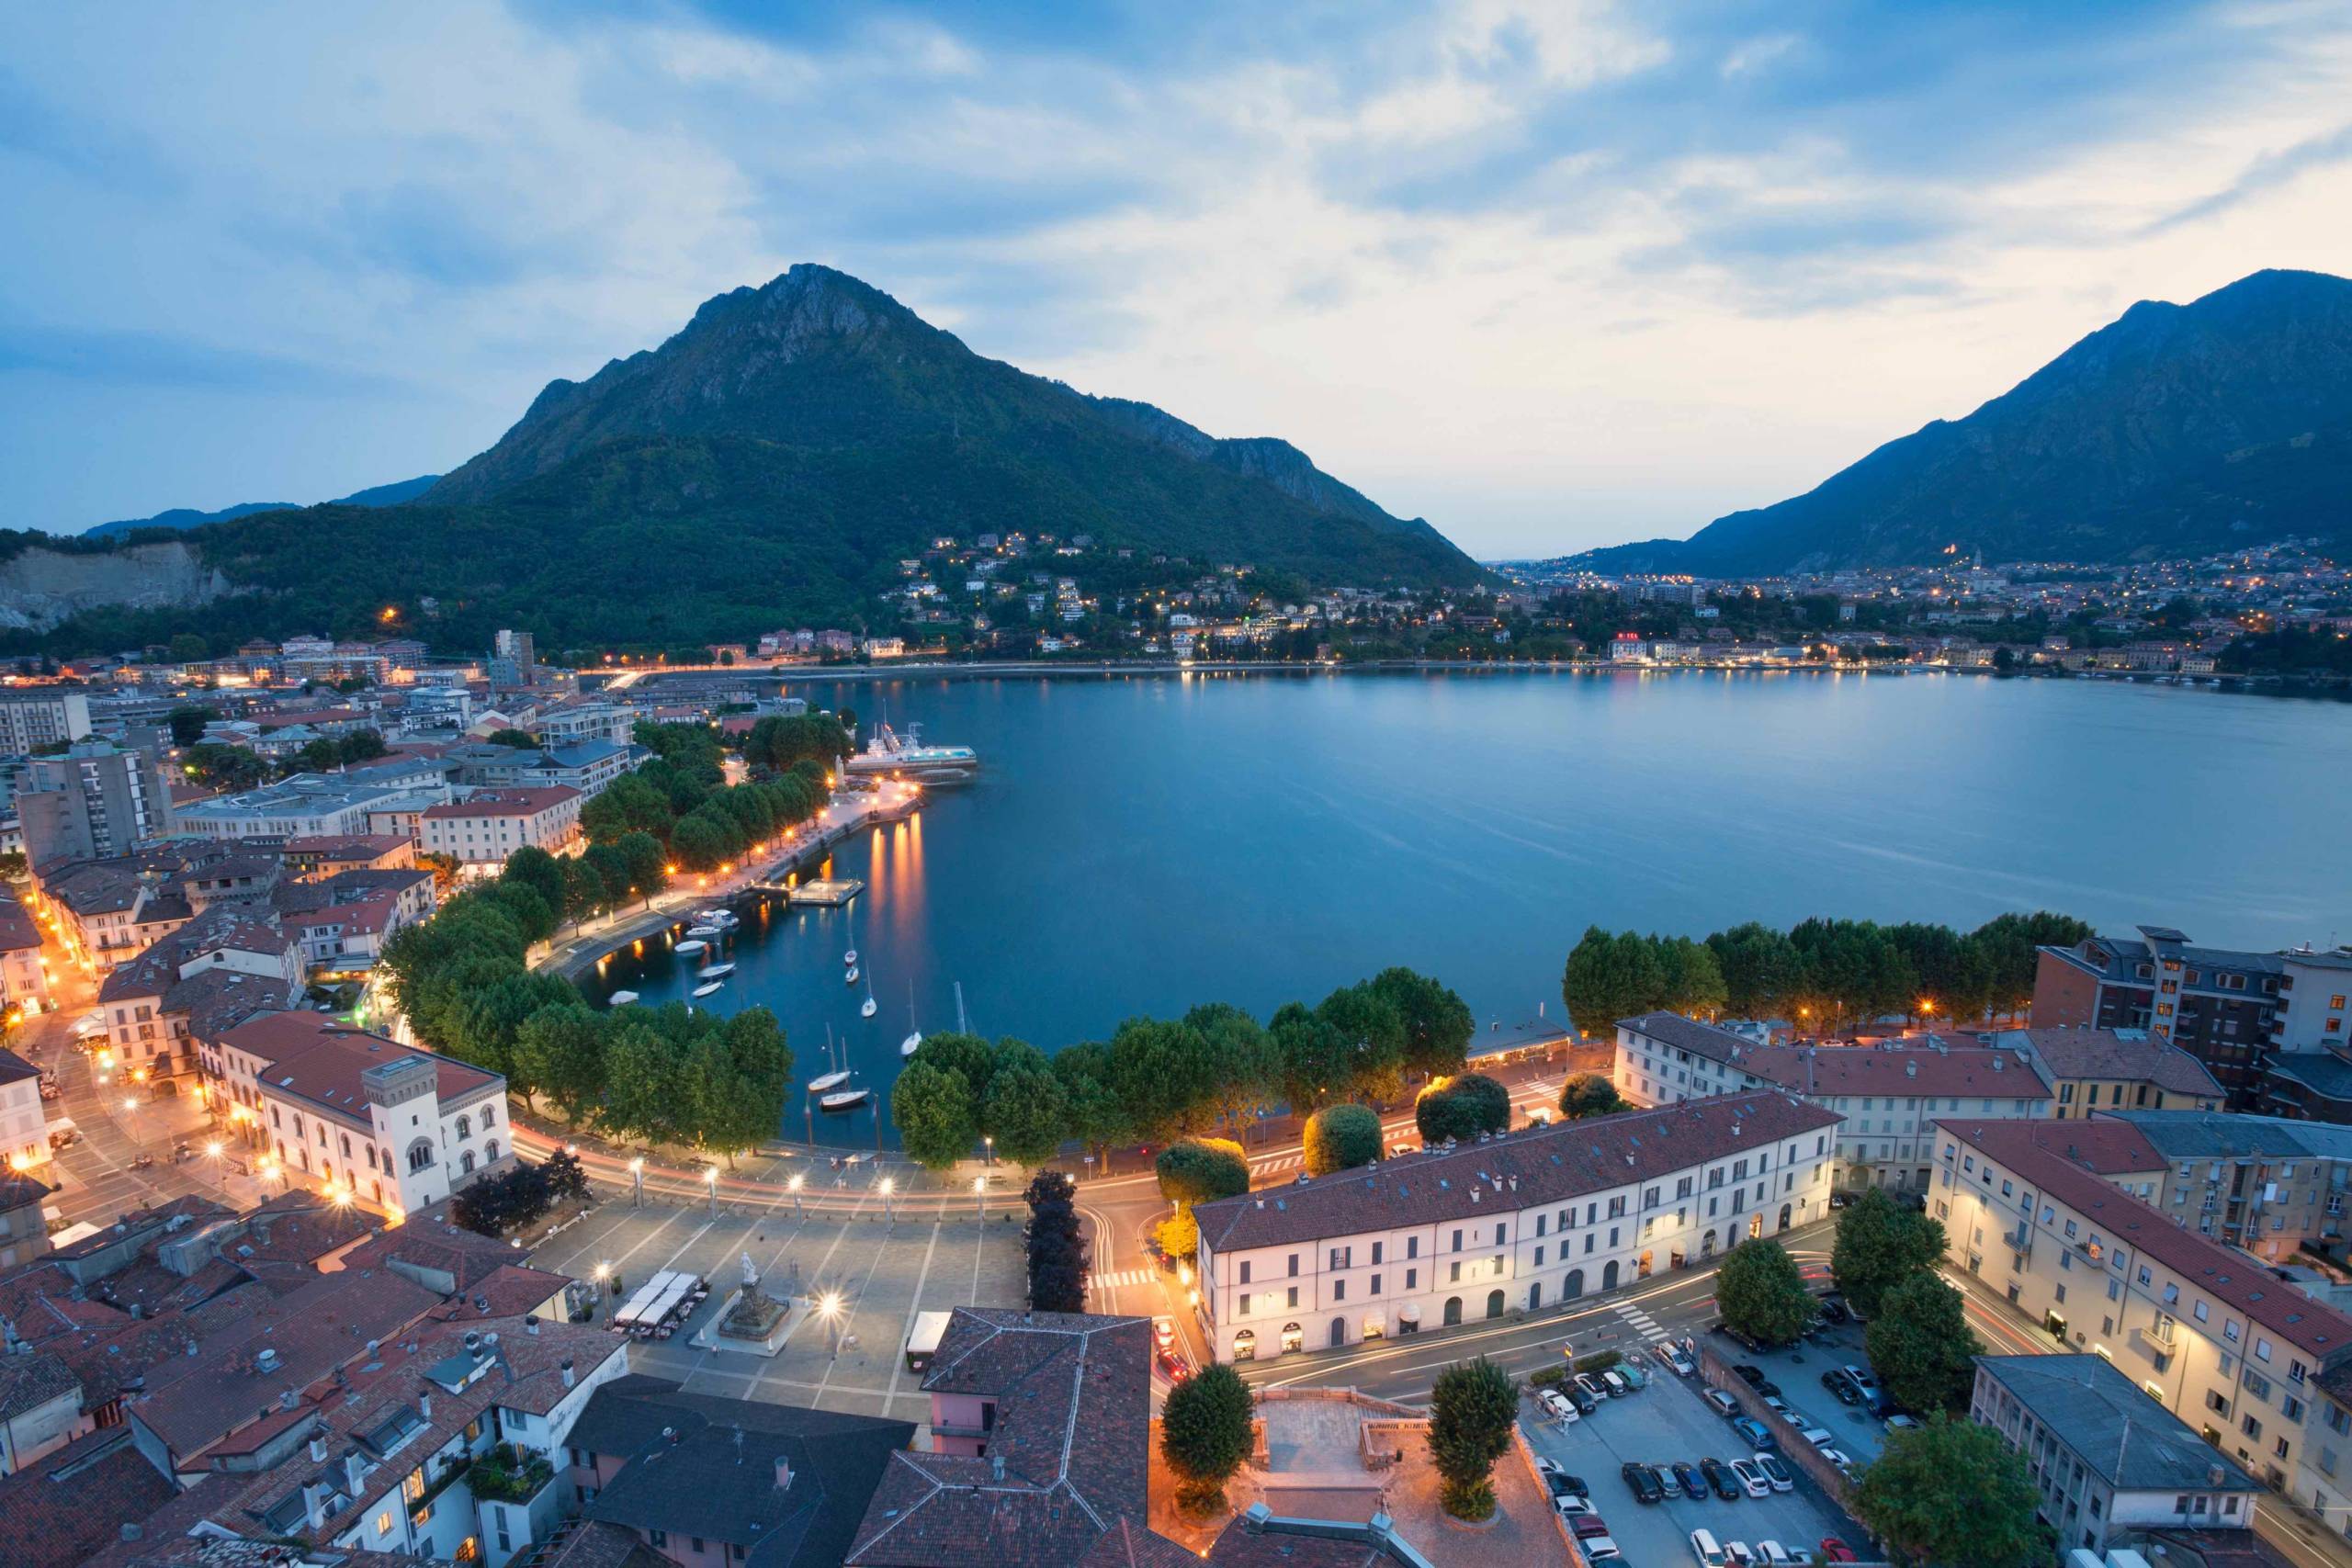 Discovering the center of Lecco